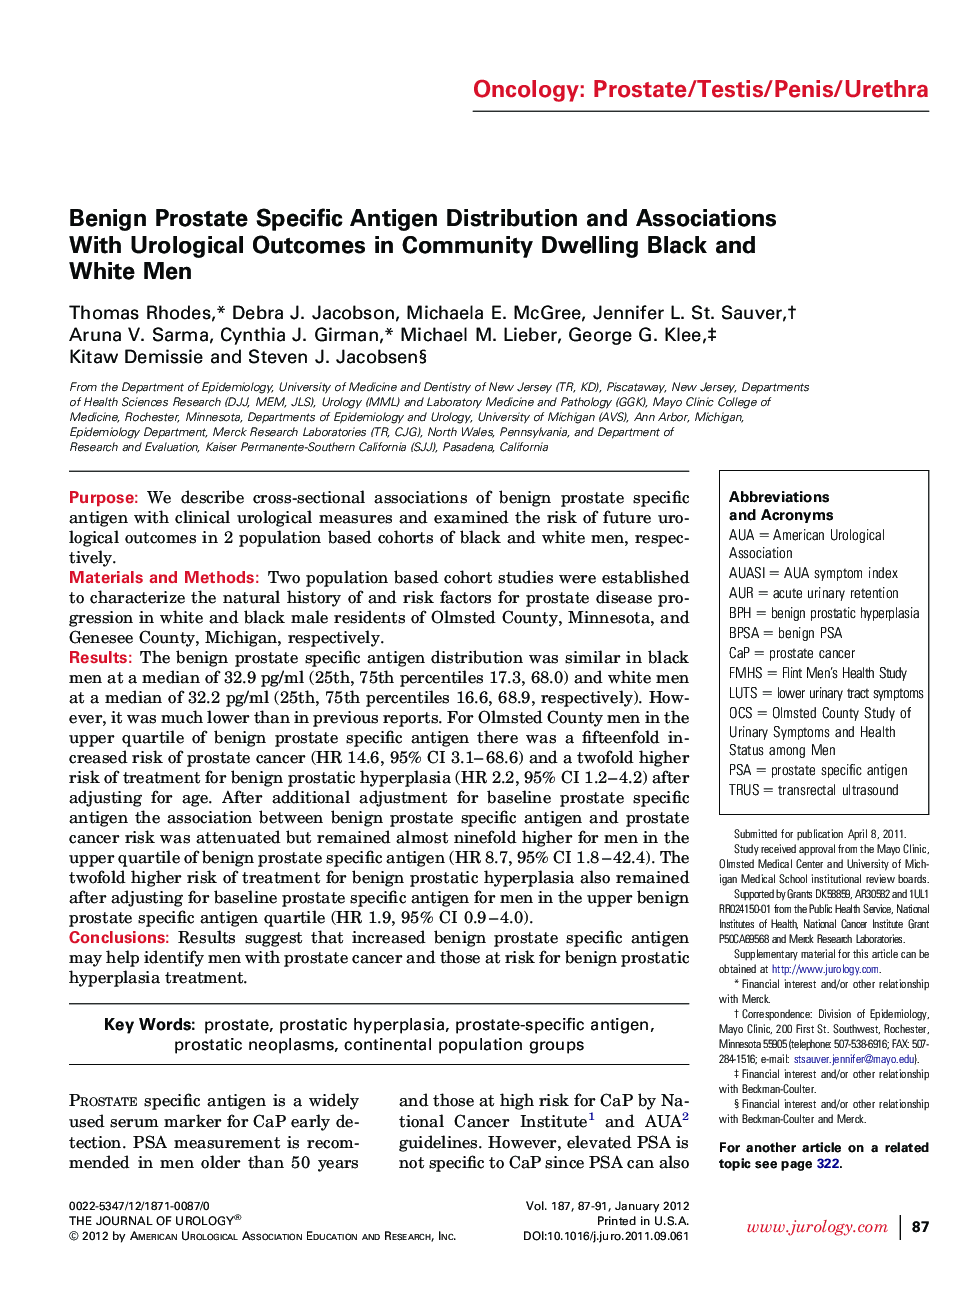 Benign Prostate Specific Antigen Distribution and Associations With Urological Outcomes in Community Dwelling Black and White Men